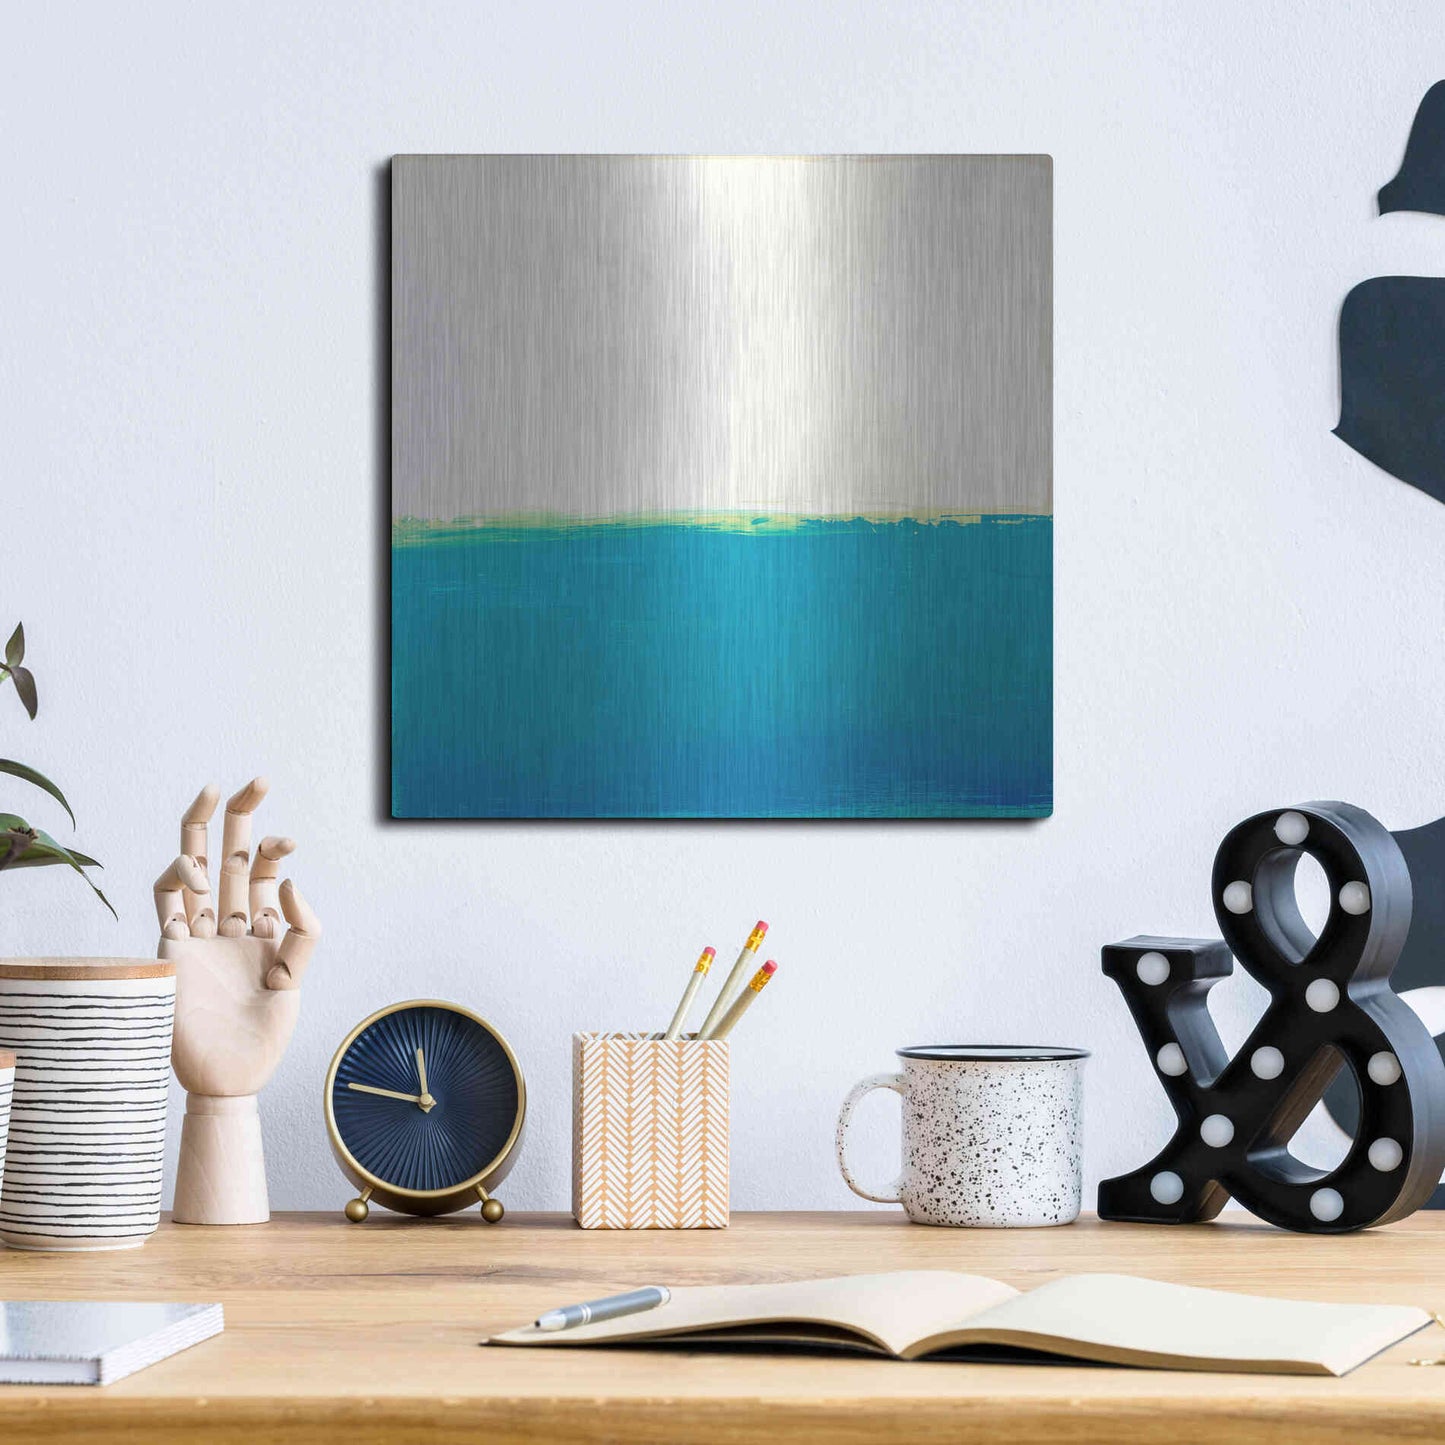 Luxe Metal Art 'Turquoise Sea' by Don Bishop Metal Wall Art,12x12